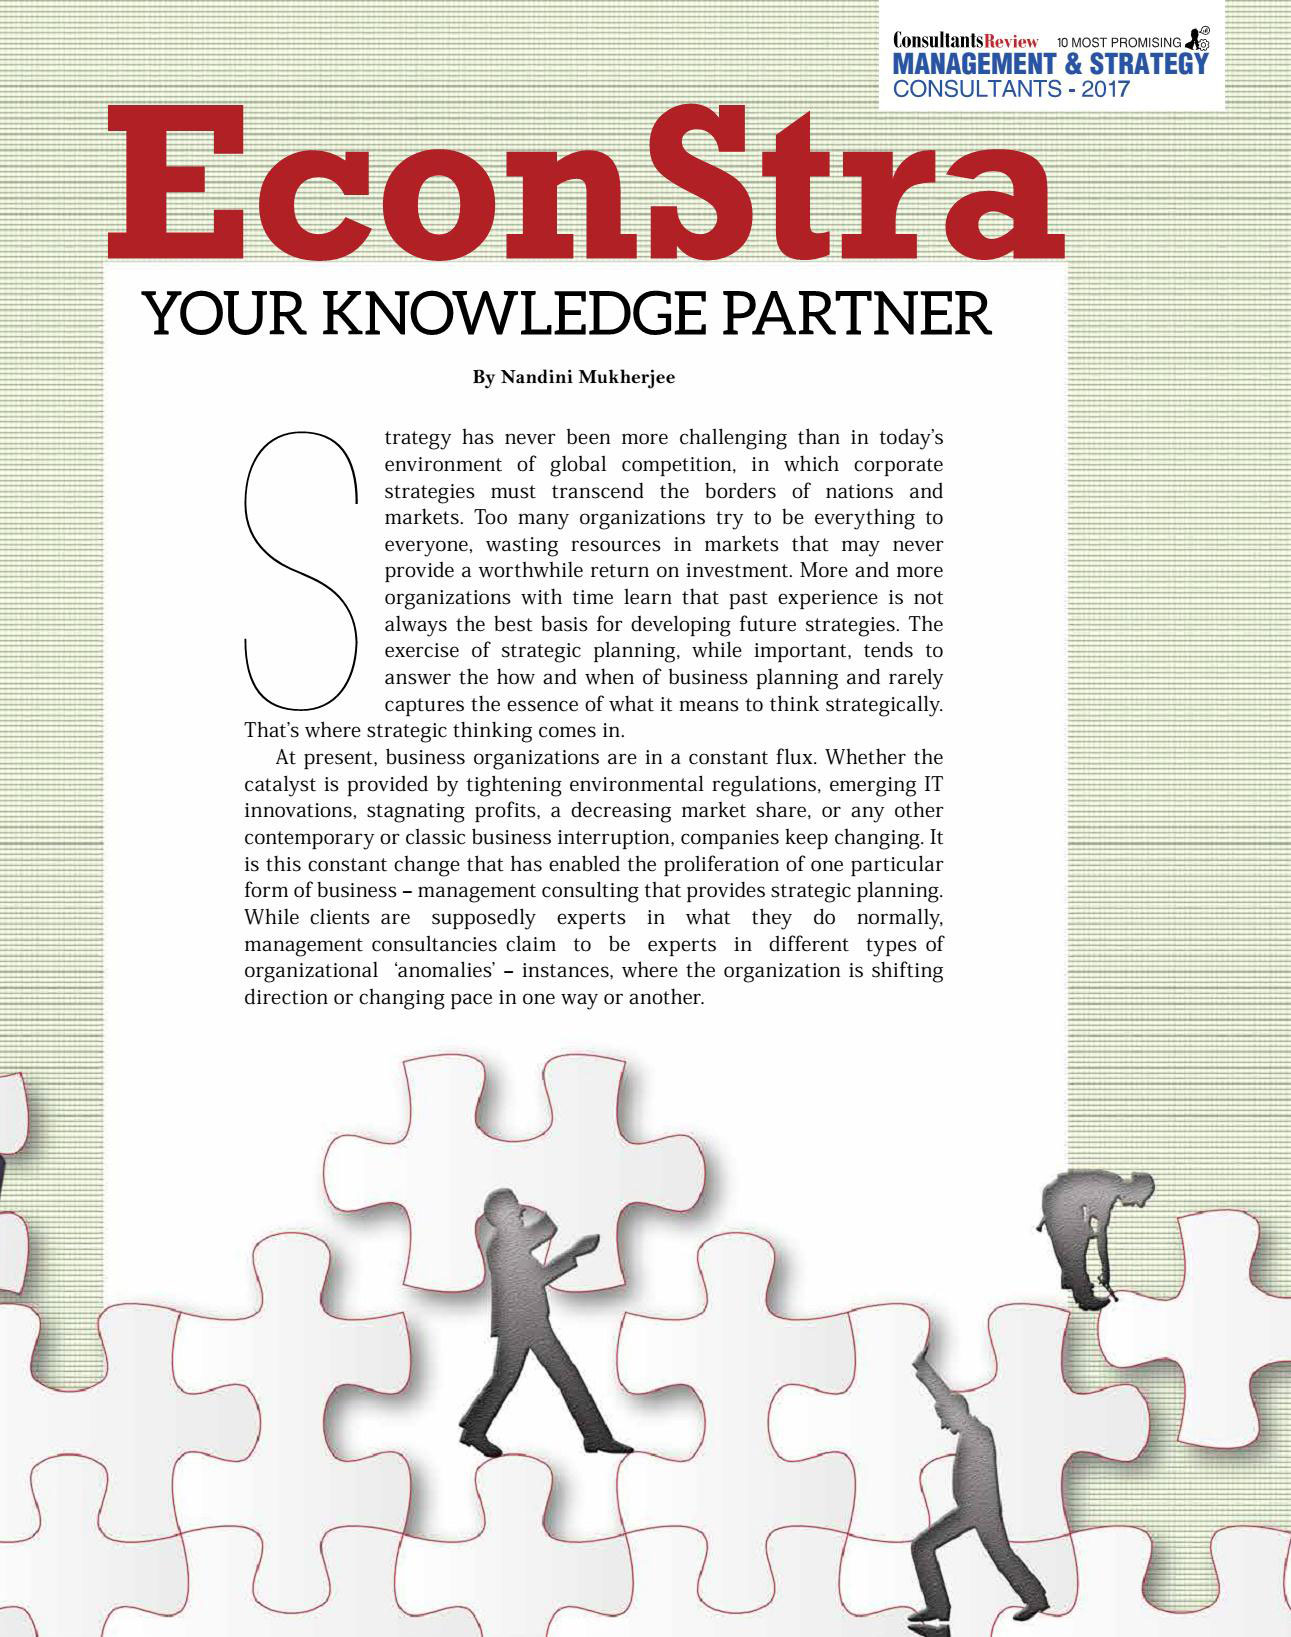 EconStra-in-Consultant-Review-Magazine-002